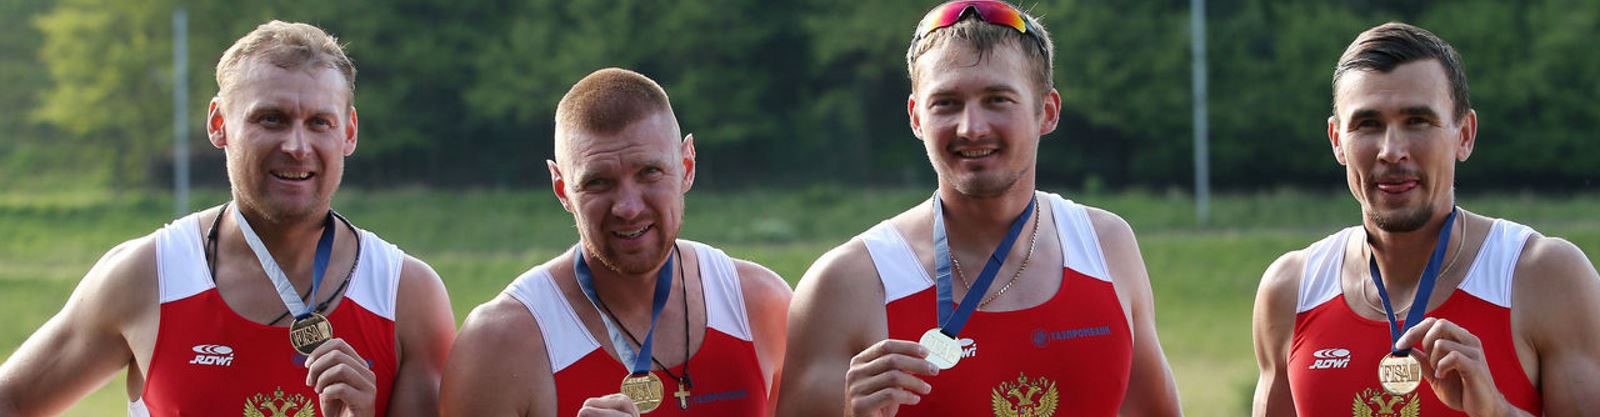 Russia rowing team